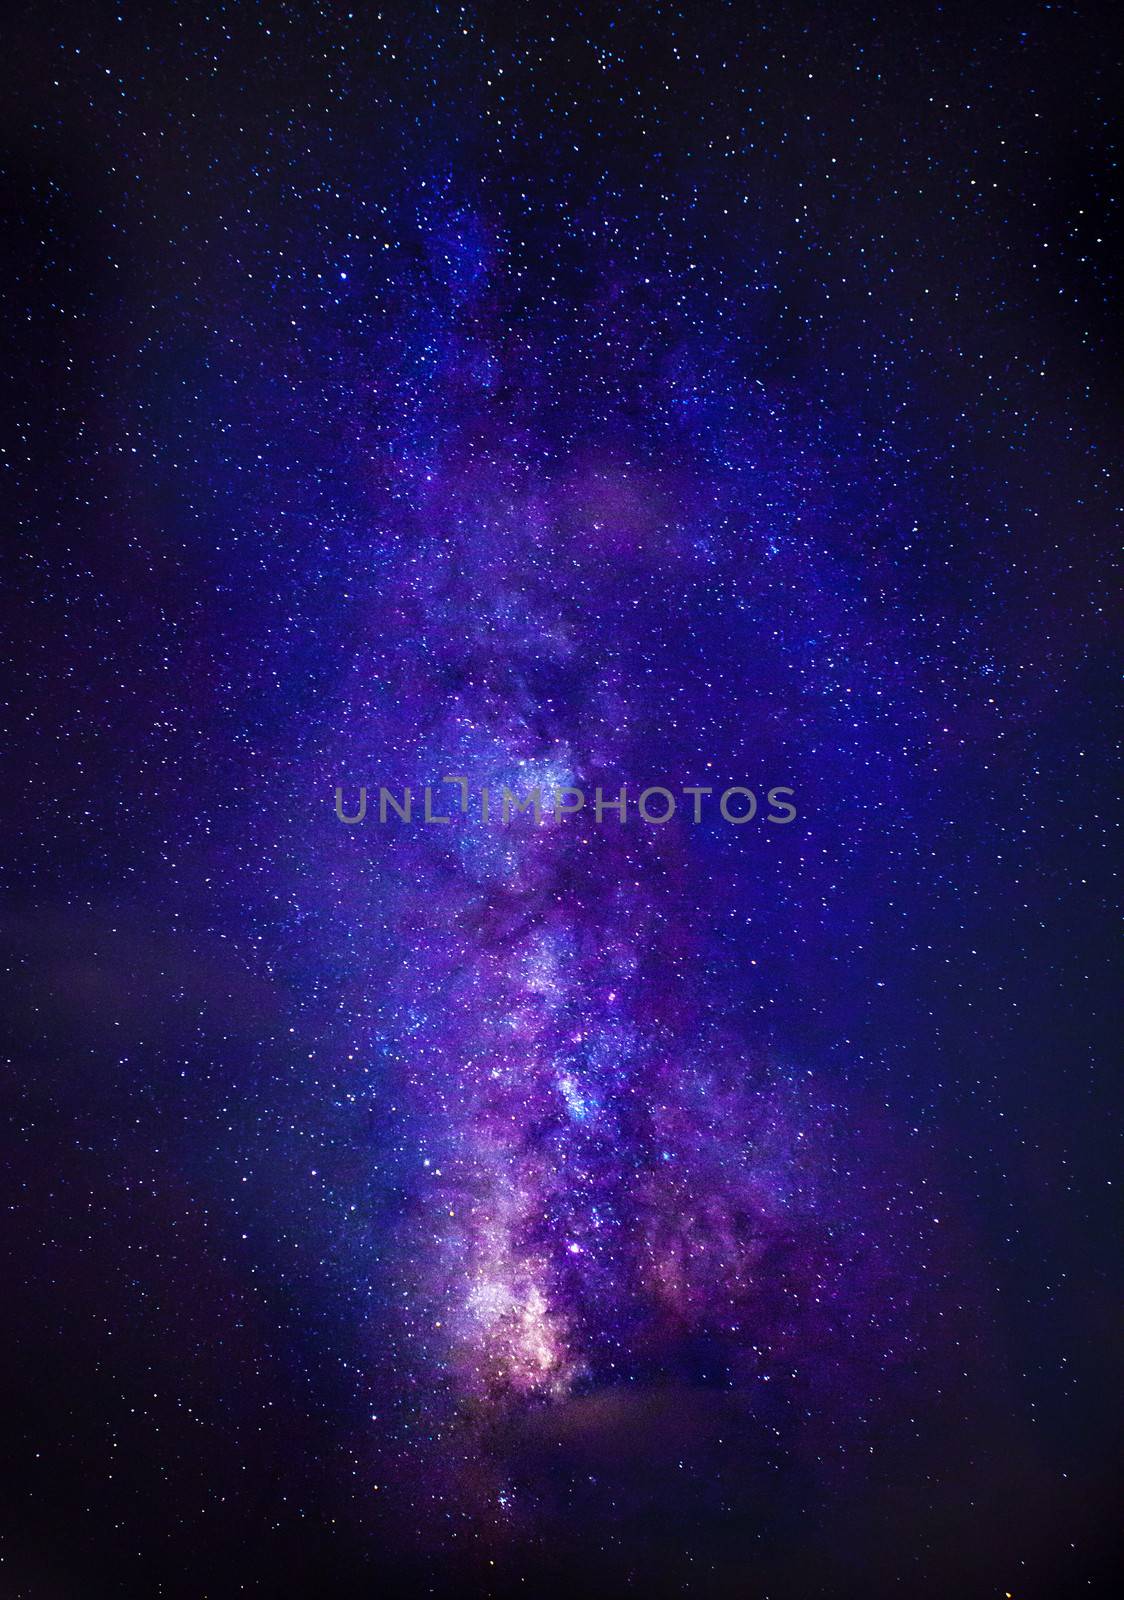 The Milky Way in August